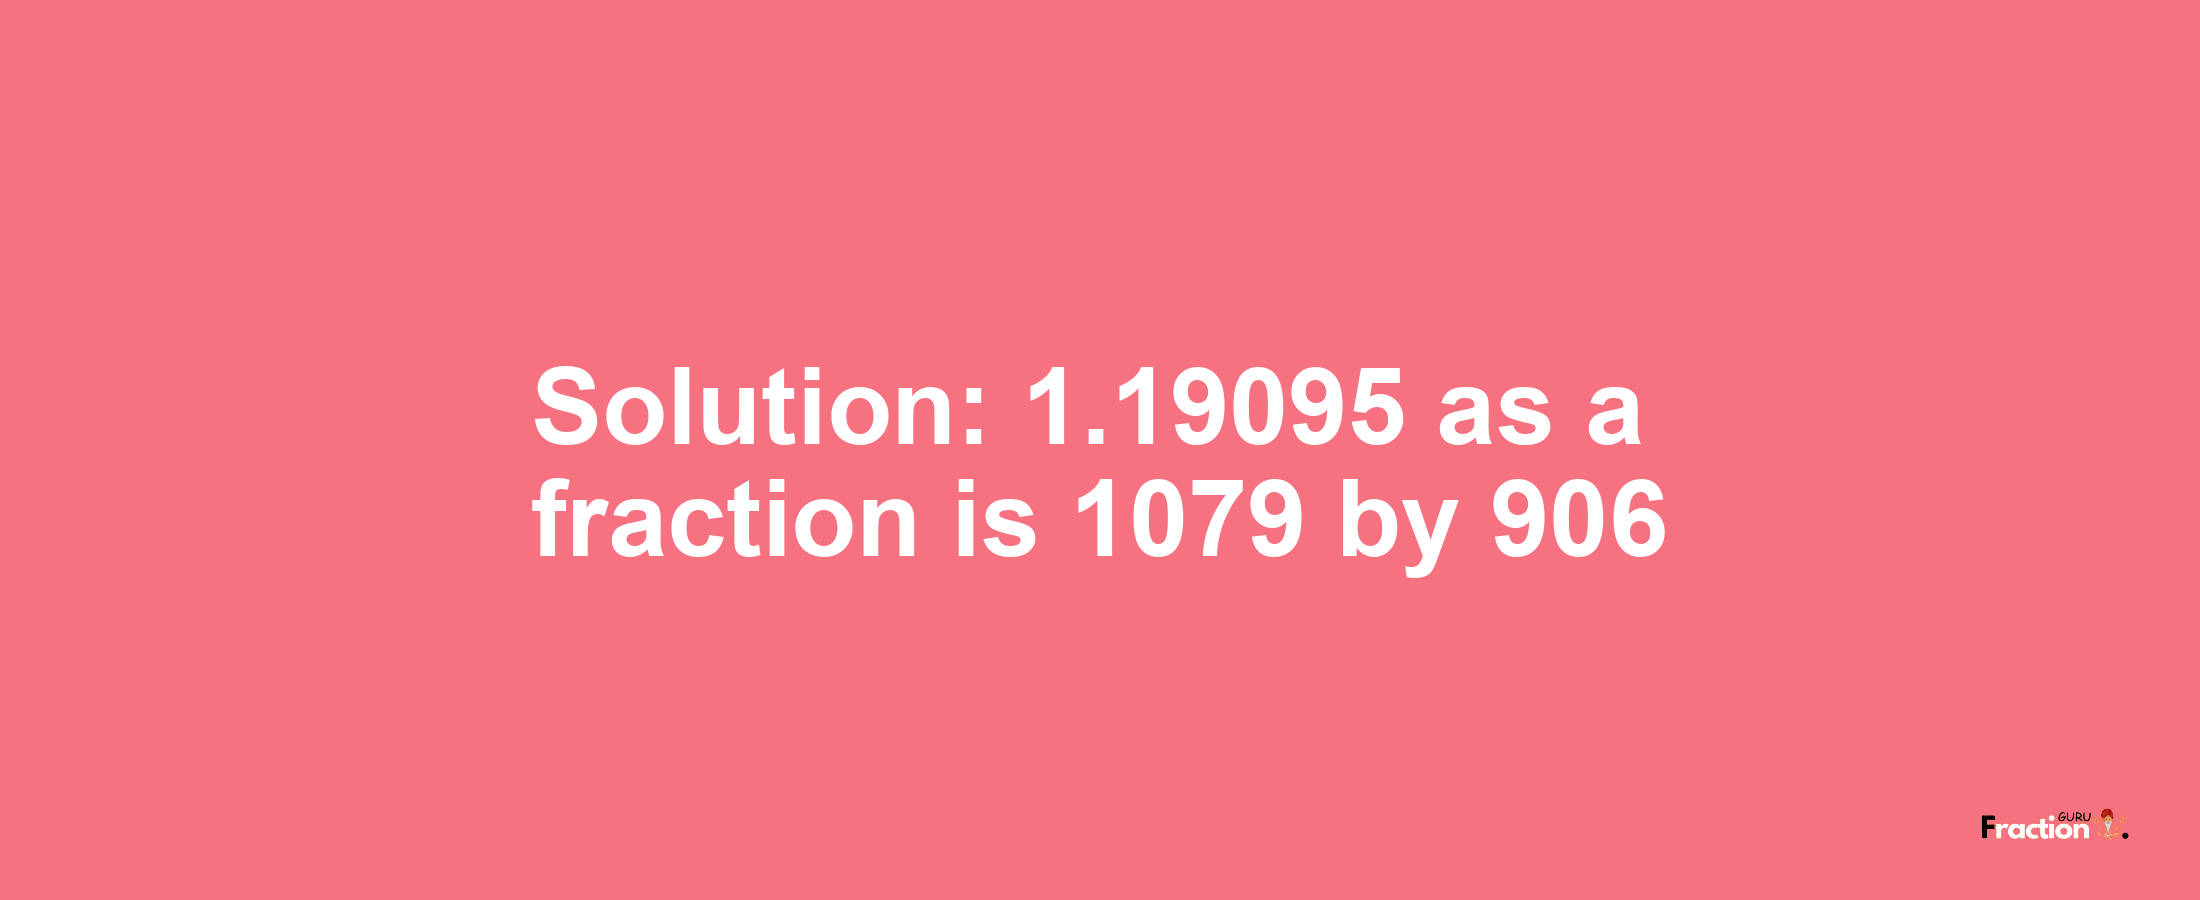 Solution:1.19095 as a fraction is 1079/906